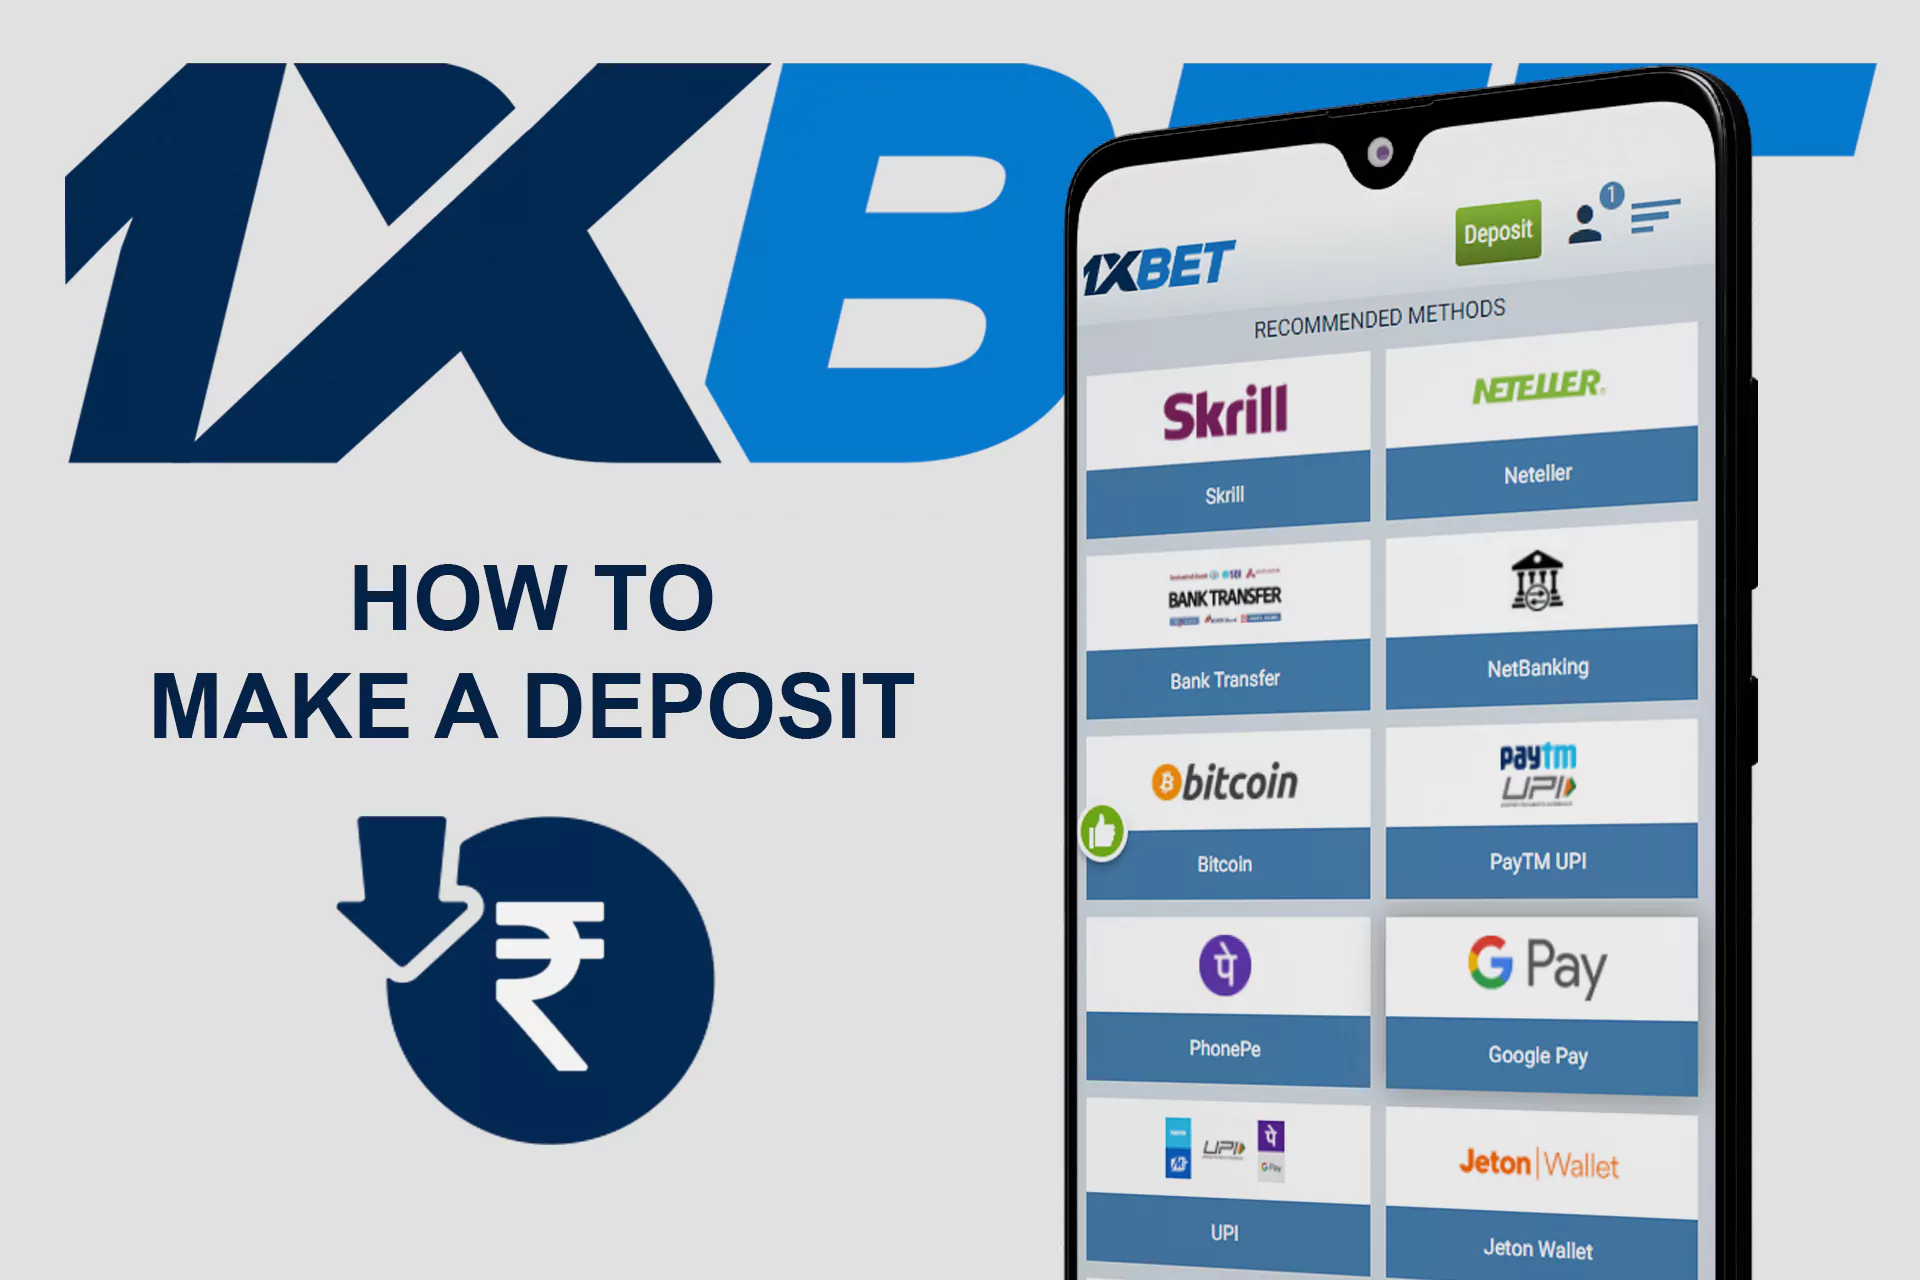 You can make a deposit through the official 1xBet app.